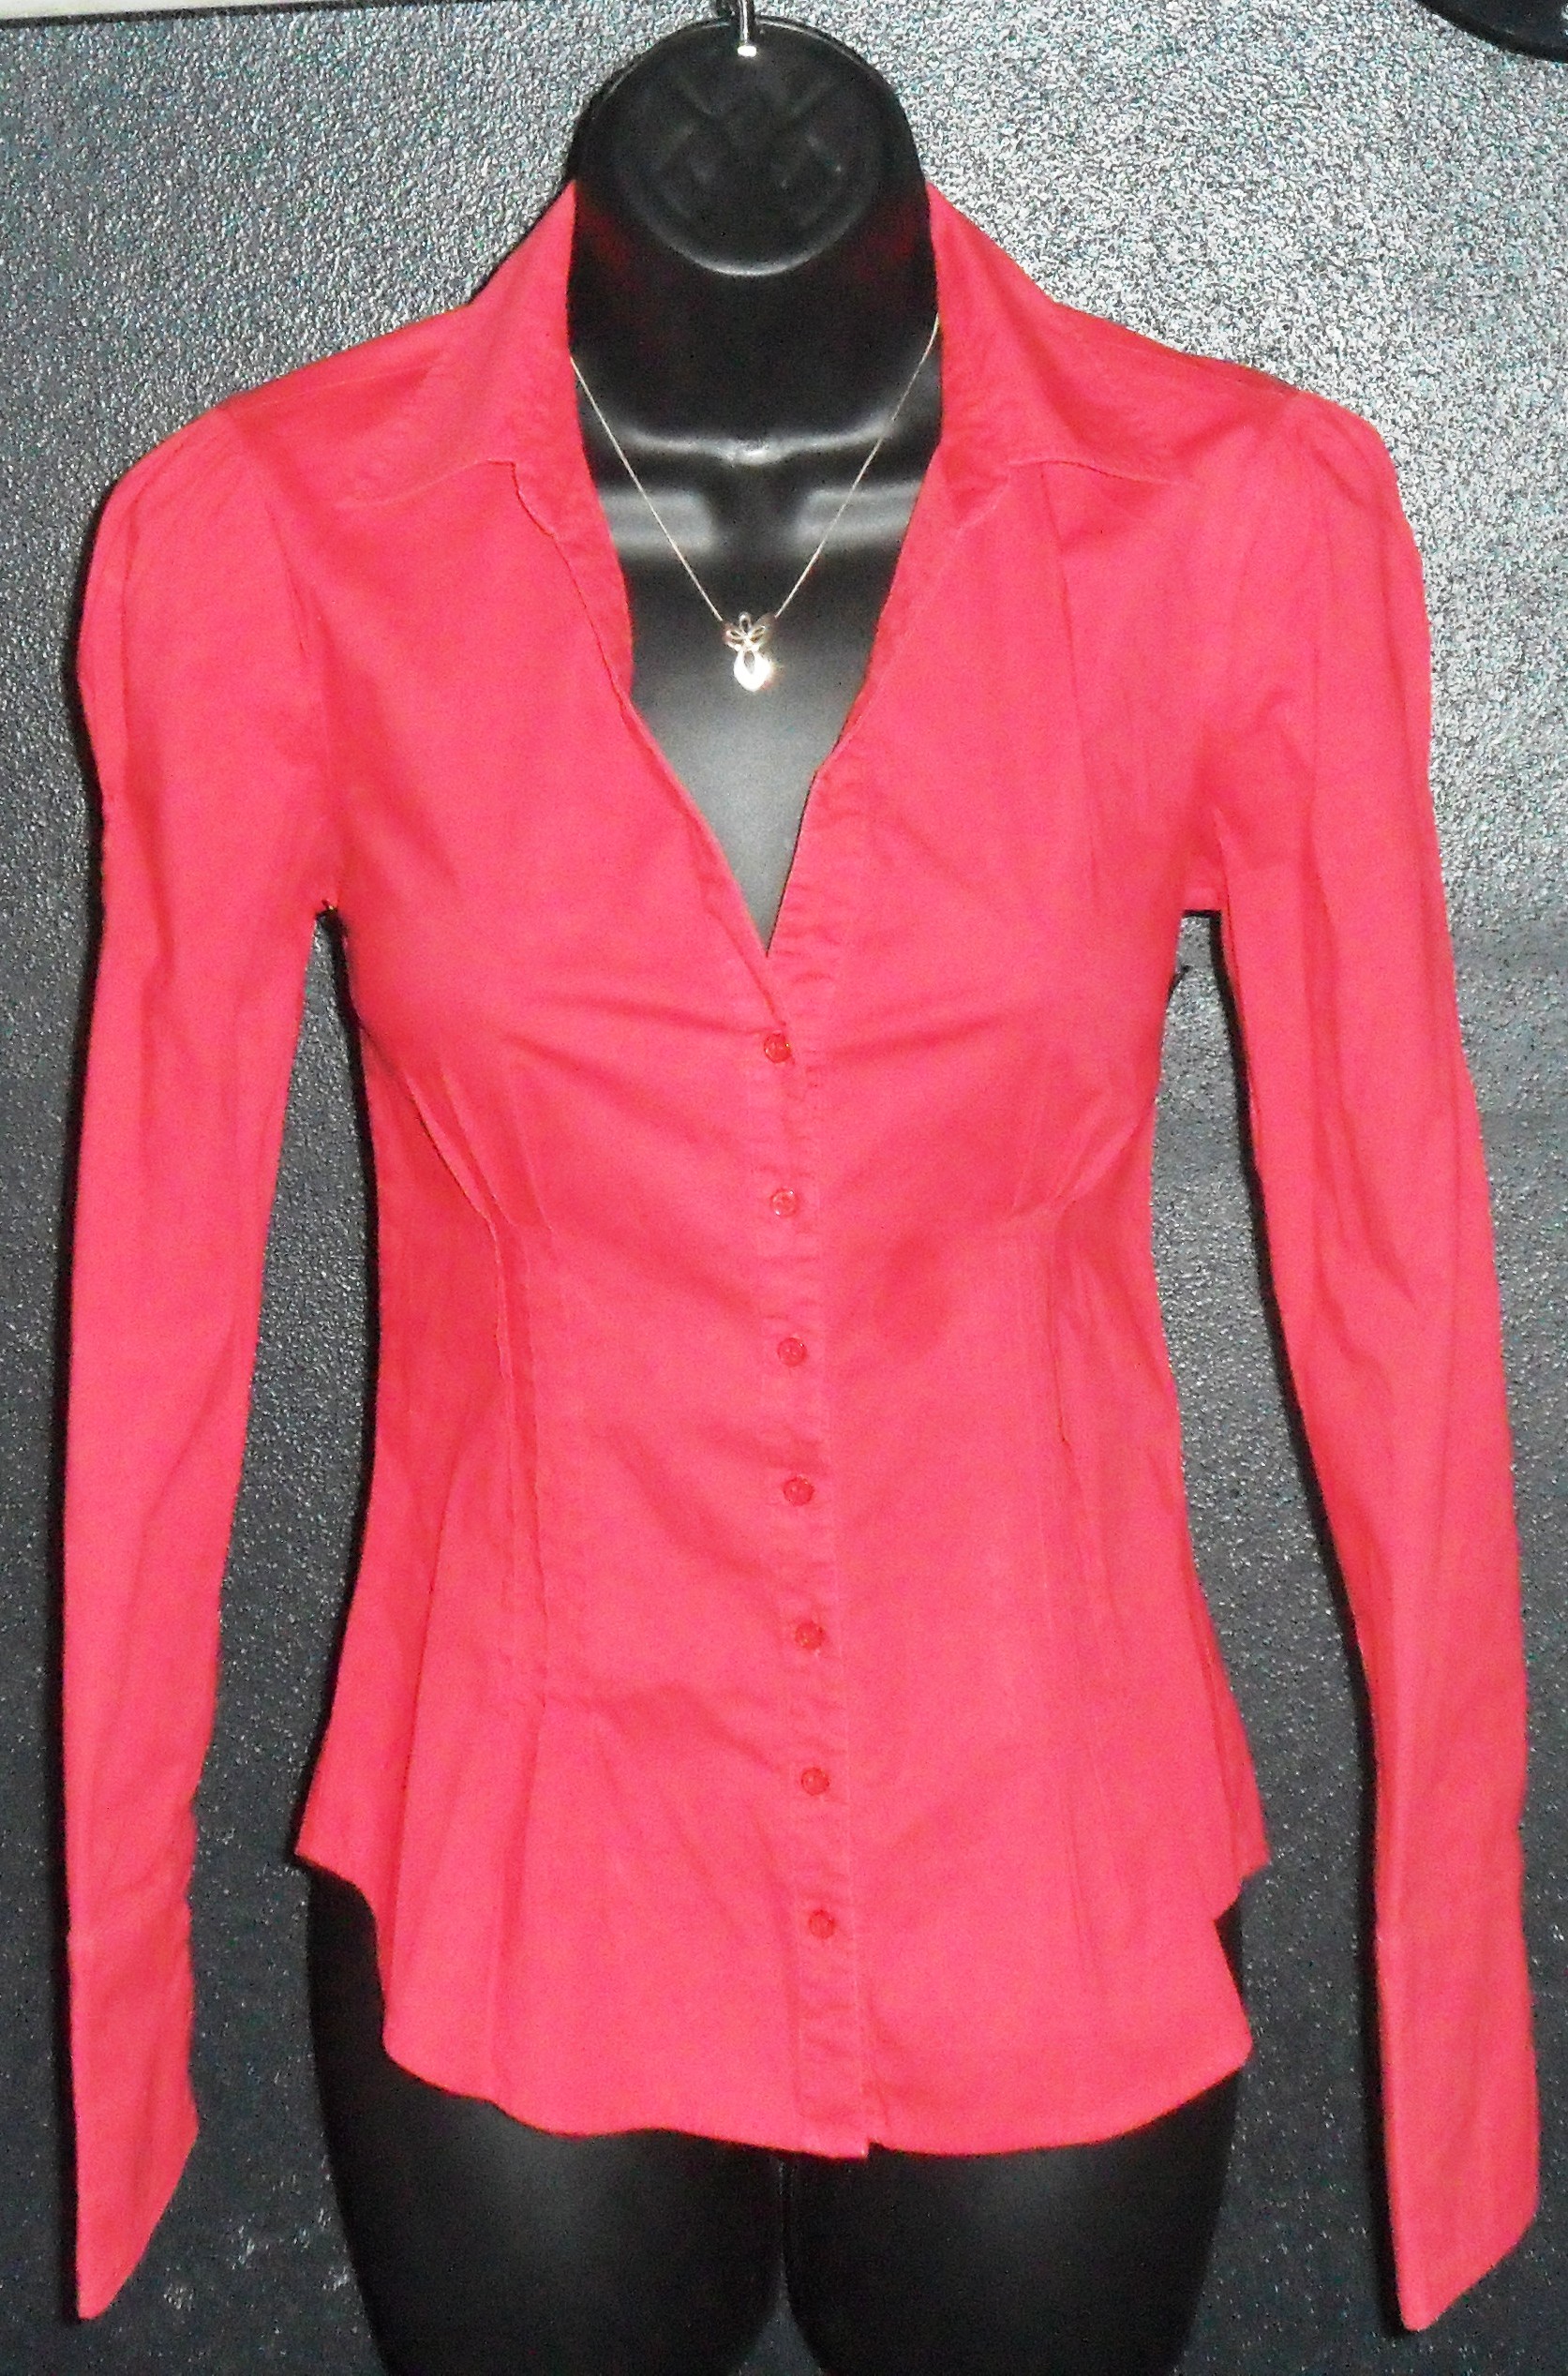 Red long sleeve shirt with cuffs